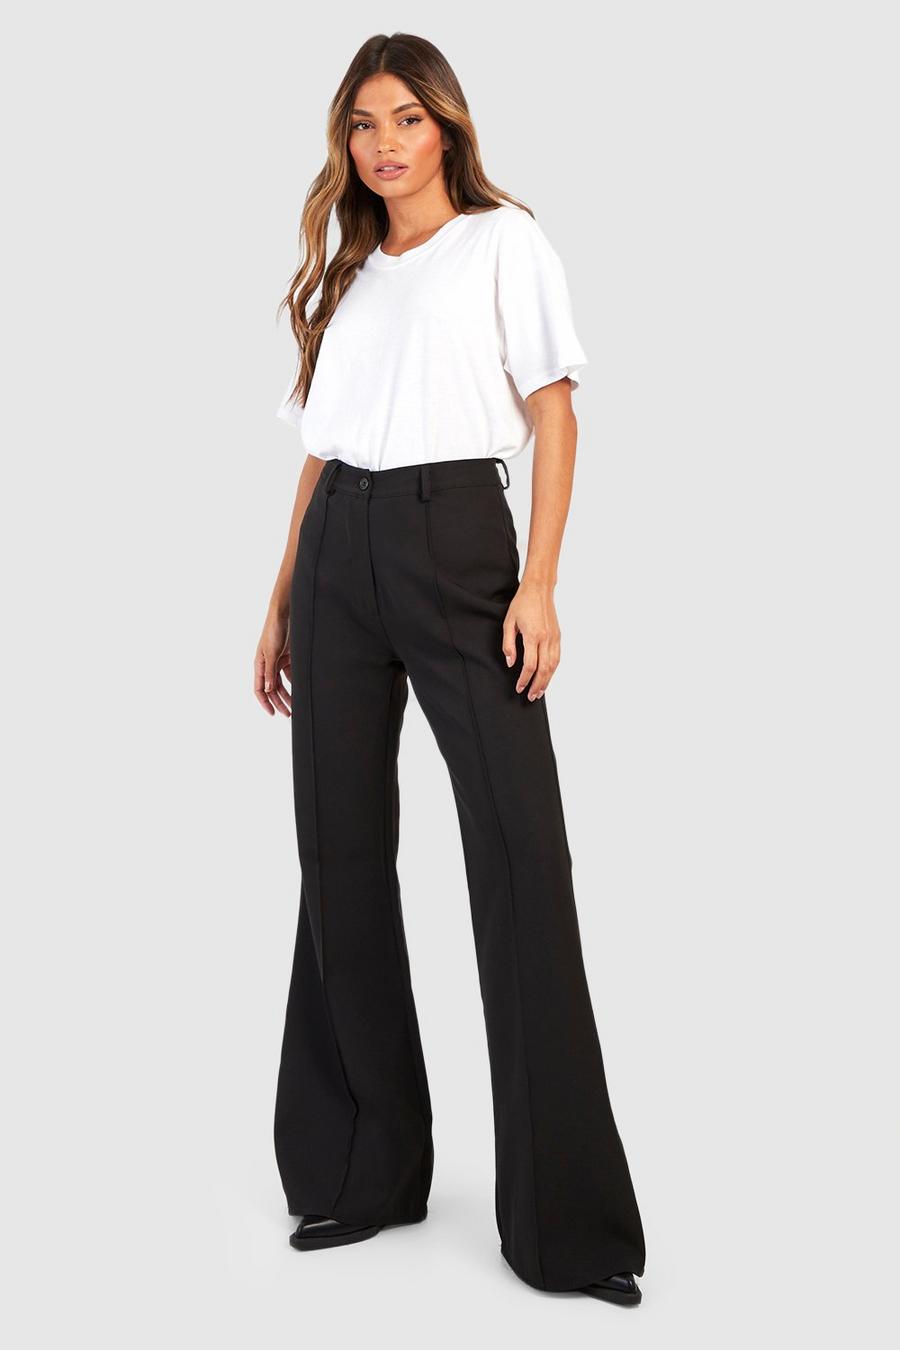 Black Woven Seam Detail Flare Pants image number 1